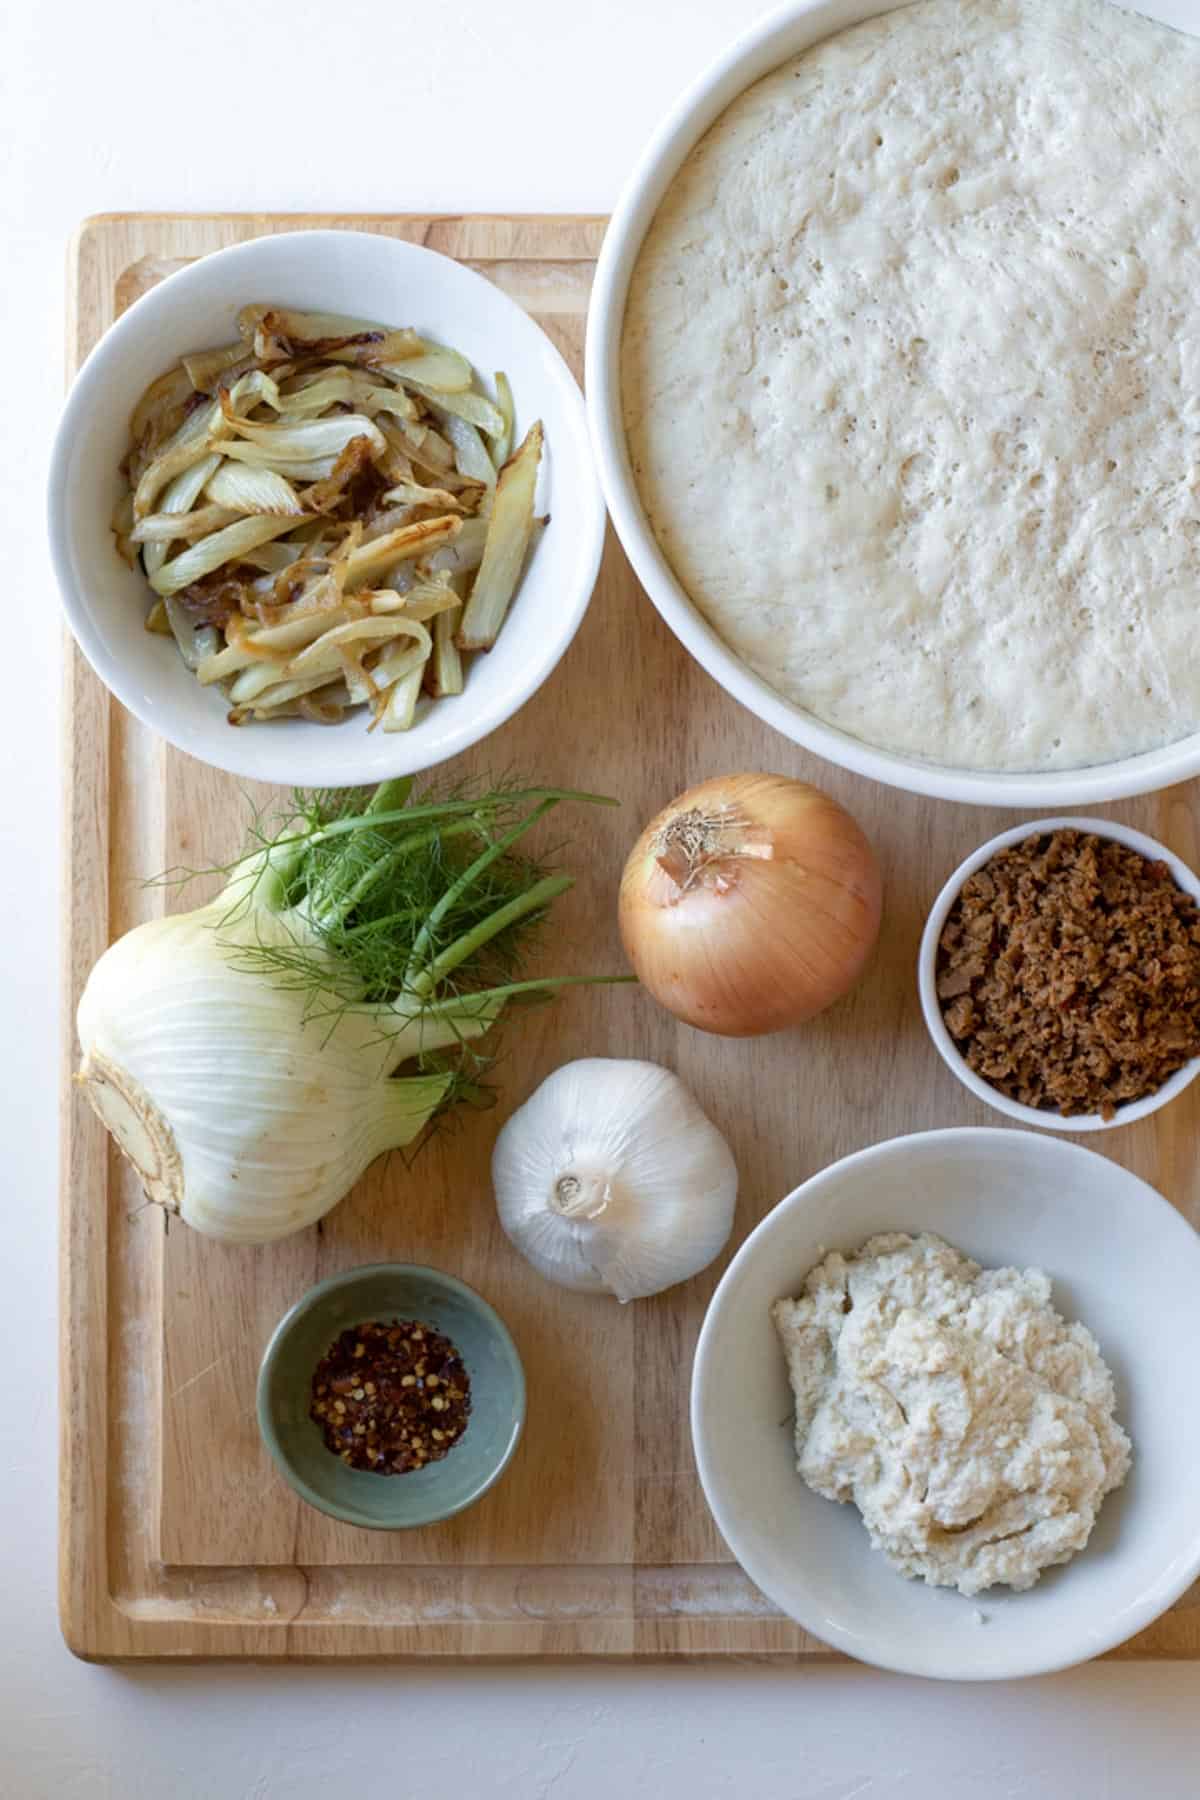 ingredients for fennel, sausage and almond ricotta pizza.